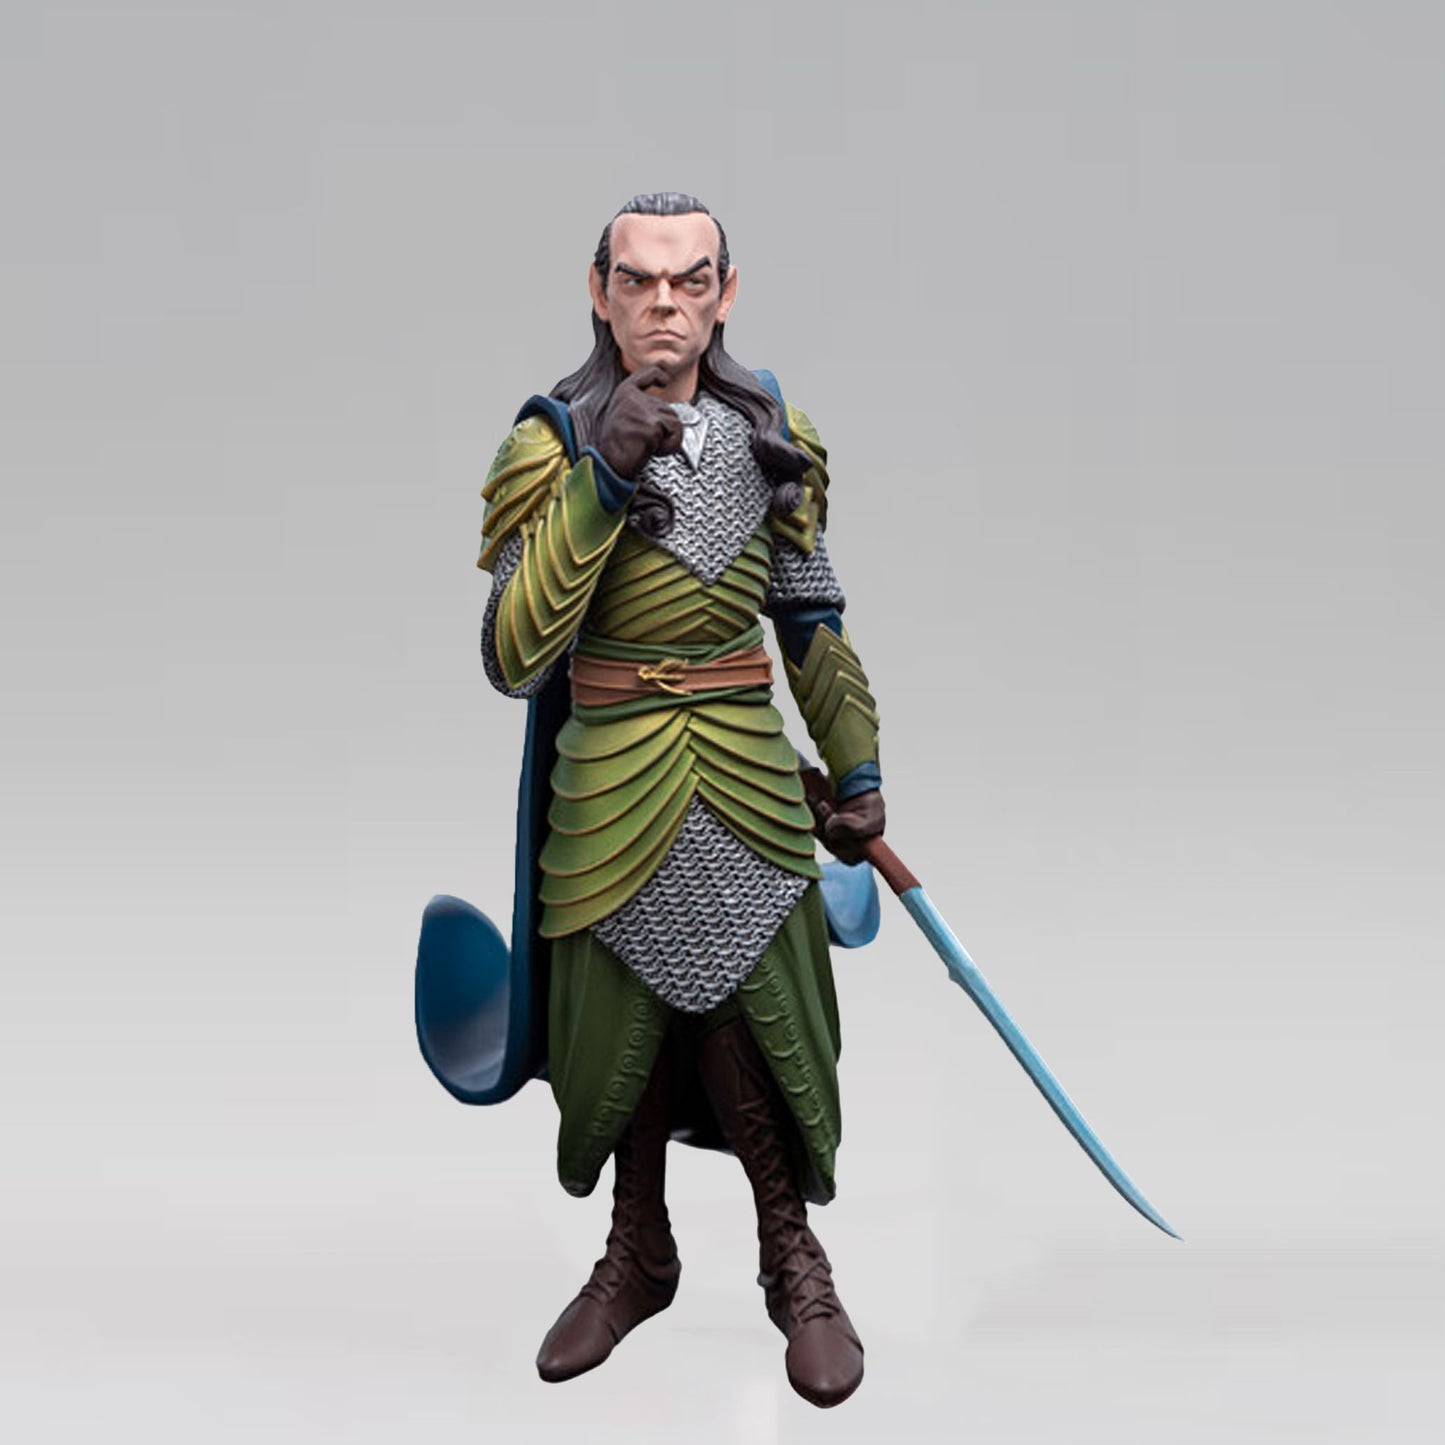 Elrond (Lord of the Rings) Mini Epics Statue by Weta Workshop